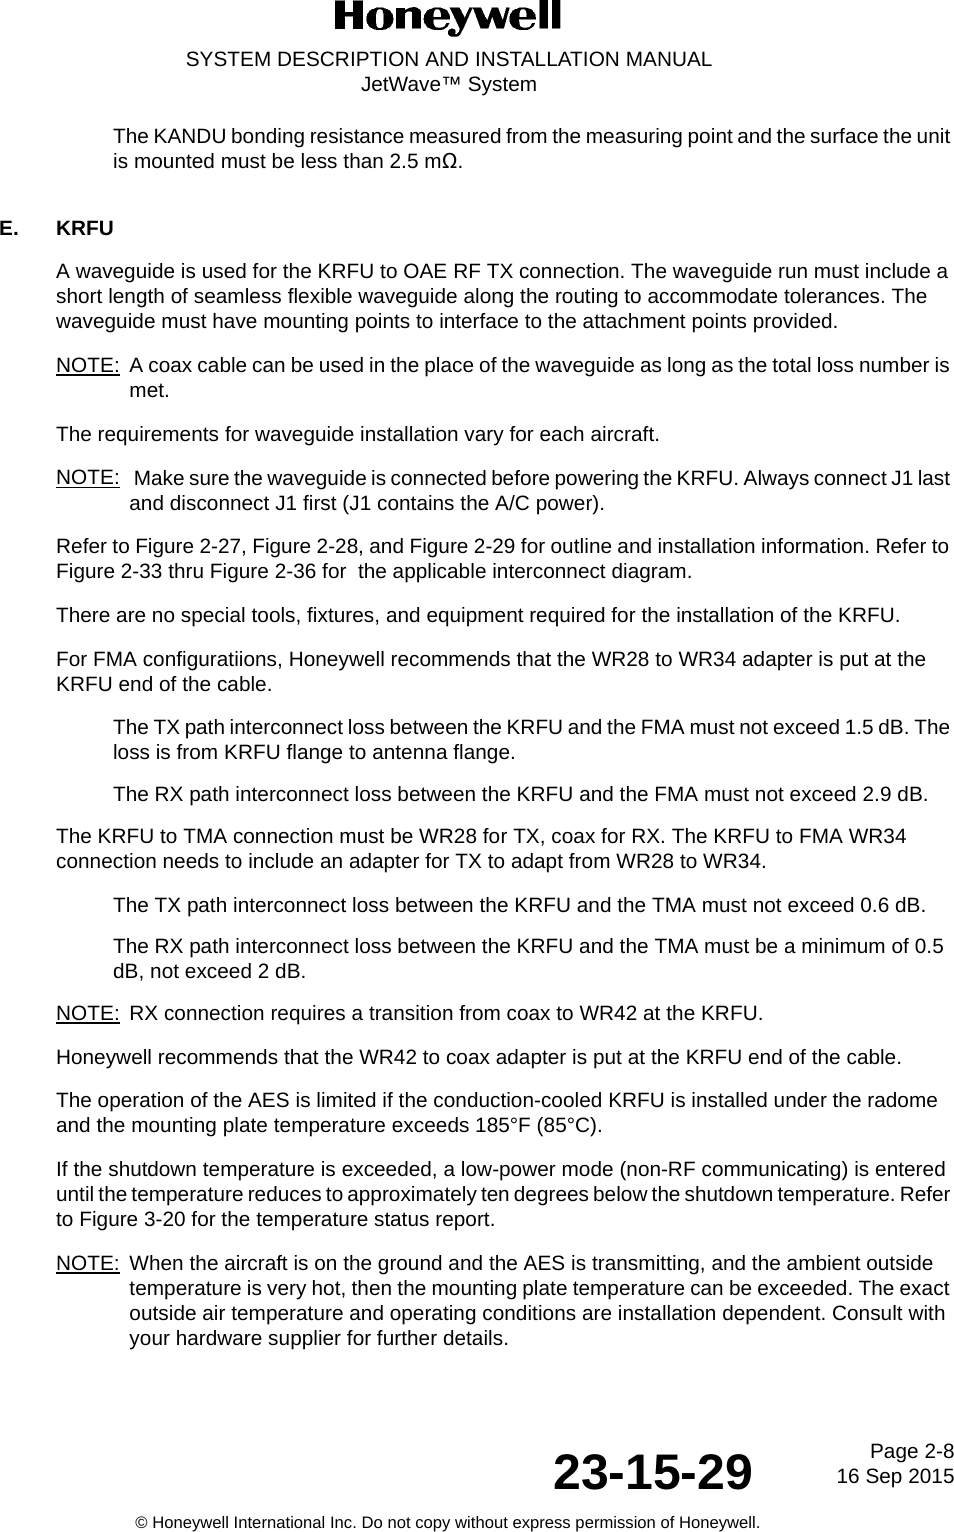 Page 2-8 16 Sep 201523-15-29SYSTEM DESCRIPTION AND INSTALLATION MANUALJetWave™ System© Honeywell International Inc. Do not copy without express permission of Honeywell.The KANDU bonding resistance measured from the measuring point and the surface the unit is mounted must be less than 2.5 mΩ.E. KRFUA waveguide is used for the KRFU to OAE RF TX connection. The waveguide run must include a short length of seamless flexible waveguide along the routing to accommodate tolerances. The waveguide must have mounting points to interface to the attachment points provided.NOTE: A coax cable can be used in the place of the waveguide as long as the total loss number is met.The requirements for waveguide installation vary for each aircraft.NOTE:  Make sure the waveguide is connected before powering the KRFU. Always connect J1 last and disconnect J1 first (J1 contains the A/C power).Refer to Figure 2-27, Figure 2-28, and Figure 2-29 for outline and installation information. Refer to Figure 2-33 thru Figure 2-36 for  the applicable interconnect diagram.There are no special tools, fixtures, and equipment required for the installation of the KRFU.For FMA configuratiions, Honeywell recommends that the WR28 to WR34 adapter is put at the KRFU end of the cable.The TX path interconnect loss between the KRFU and the FMA must not exceed 1.5 dB. The loss is from KRFU flange to antenna flange.The RX path interconnect loss between the KRFU and the FMA must not exceed 2.9 dB.  The KRFU to TMA connection must be WR28 for TX, coax for RX. The KRFU to FMA WR34 connection needs to include an adapter for TX to adapt from WR28 to WR34.The TX path interconnect loss between the KRFU and the TMA must not exceed 0.6 dB.The RX path interconnect loss between the KRFU and the TMA must be a minimum of 0.5 dB, not exceed 2 dB. NOTE: RX connection requires a transition from coax to WR42 at the KRFU.Honeywell recommends that the WR42 to coax adapter is put at the KRFU end of the cable.The operation of the AES is limited if the conduction-cooled KRFU is installed under the radome and the mounting plate temperature exceeds 185°F (85°C).If the shutdown temperature is exceeded, a low-power mode (non-RF communicating) is entered until the temperature reduces to approximately ten degrees below the shutdown temperature. Refer to Figure 3-20 for the temperature status report.NOTE: When the aircraft is on the ground and the AES is transmitting, and the ambient outside temperature is very hot, then the mounting plate temperature can be exceeded. The exact outside air temperature and operating conditions are installation dependent. Consult with your hardware supplier for further details.